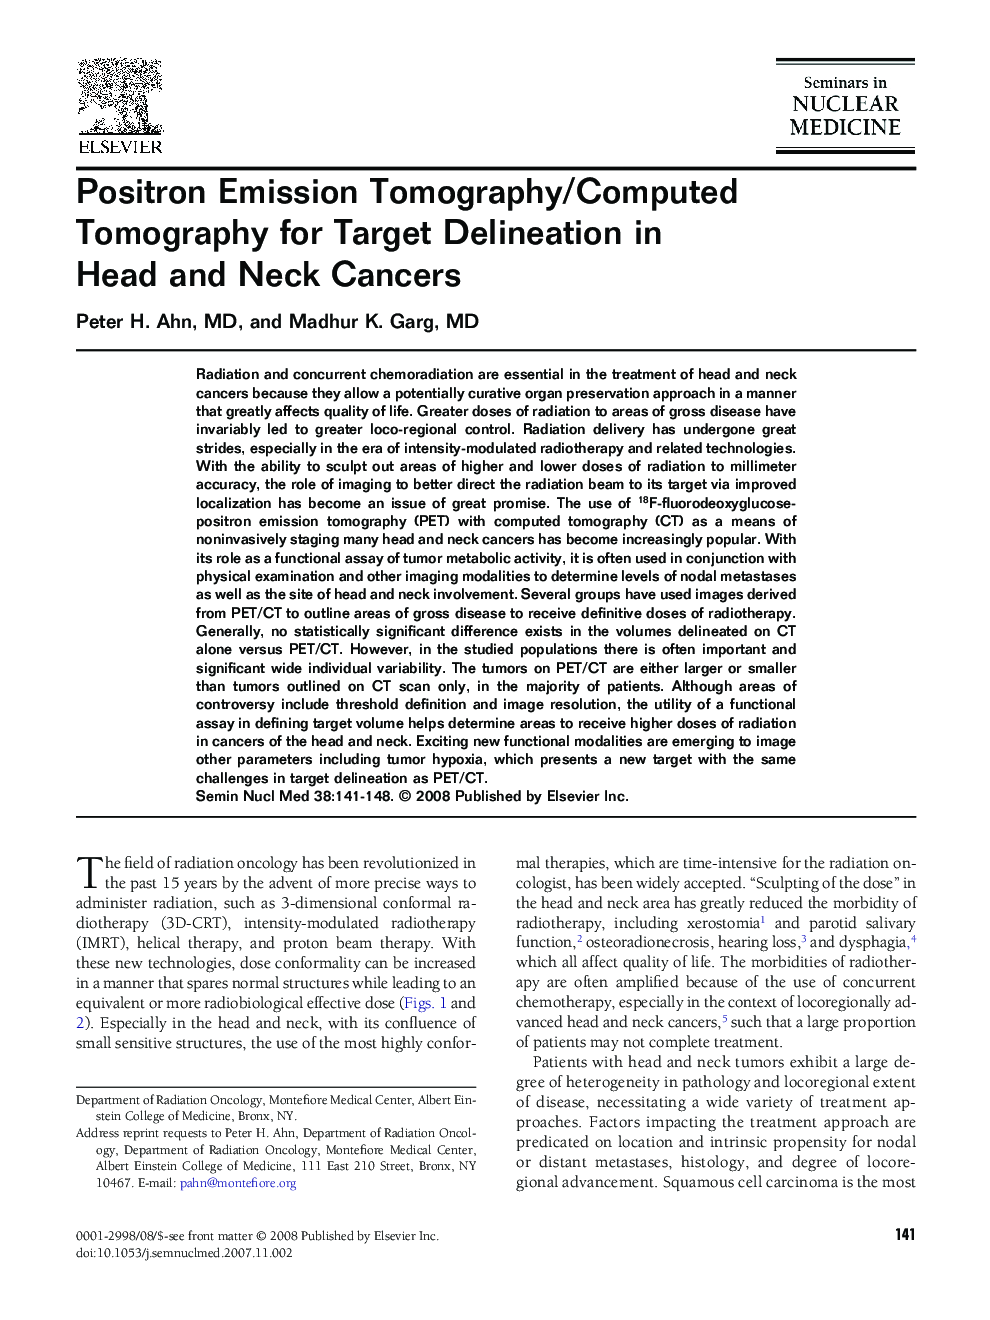 Positron Emission Tomography/Computed Tomography for Target Delineation in Head and Neck Cancers